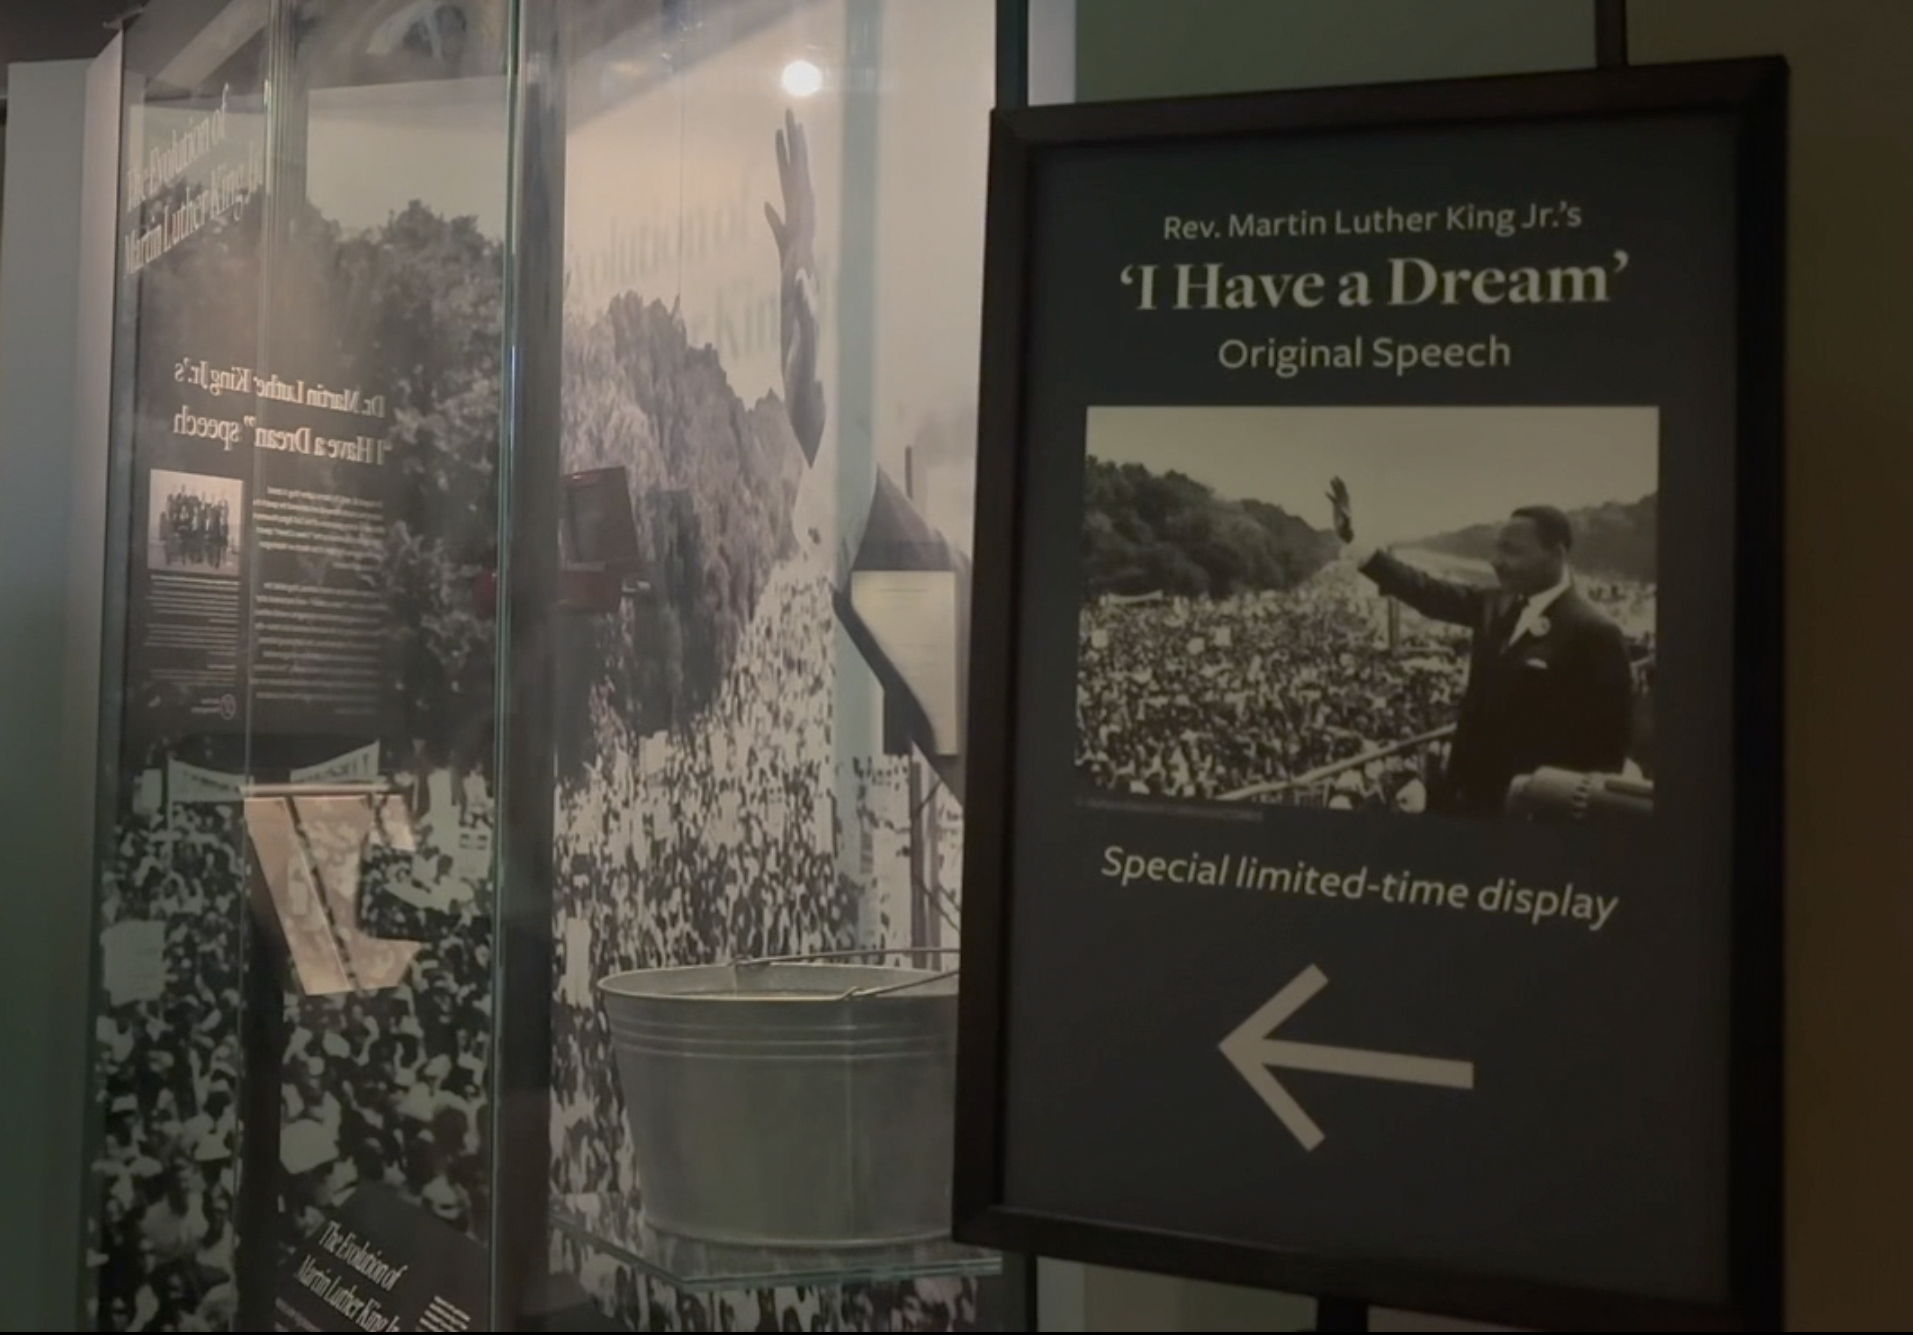 Martin Luther King Exhibit Gives Rare Look at Original March on Washington Speech